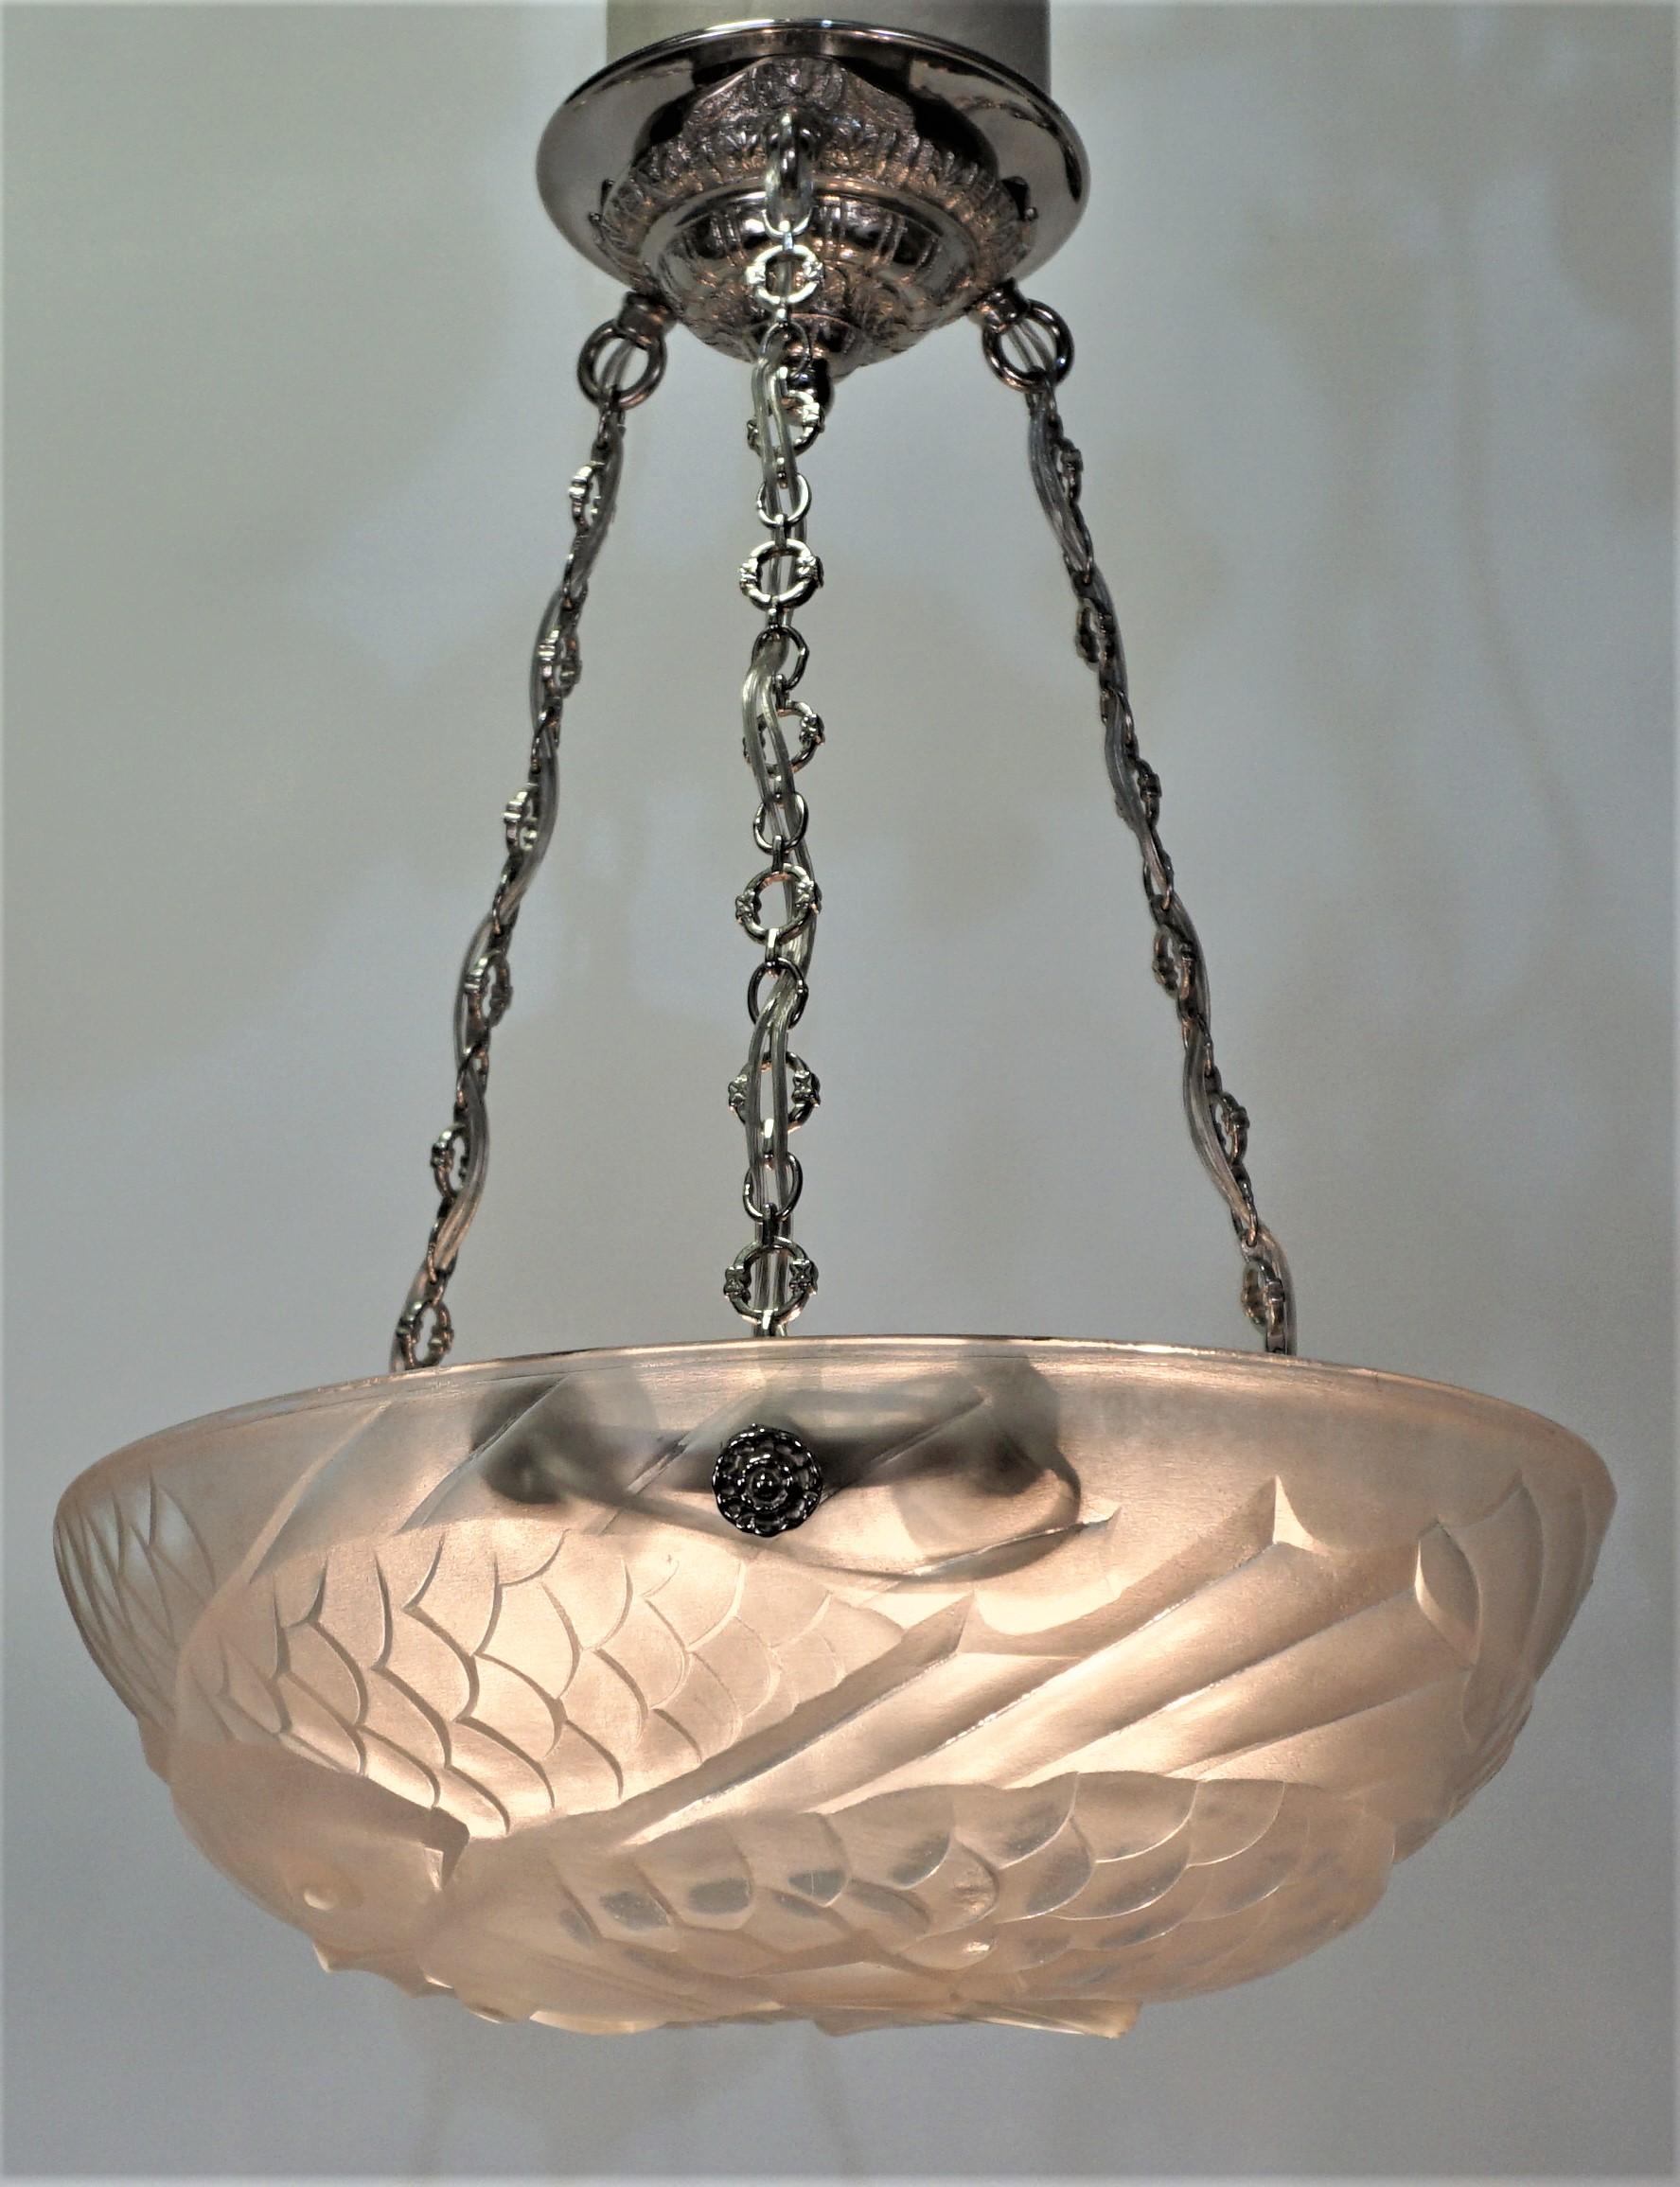 A signed clear frost glass French Art Deco hanging fixture chandelier circa 1930 in nickel-plated bronze or solid bronze hardware by Gills
Six-light 60 watt max each.